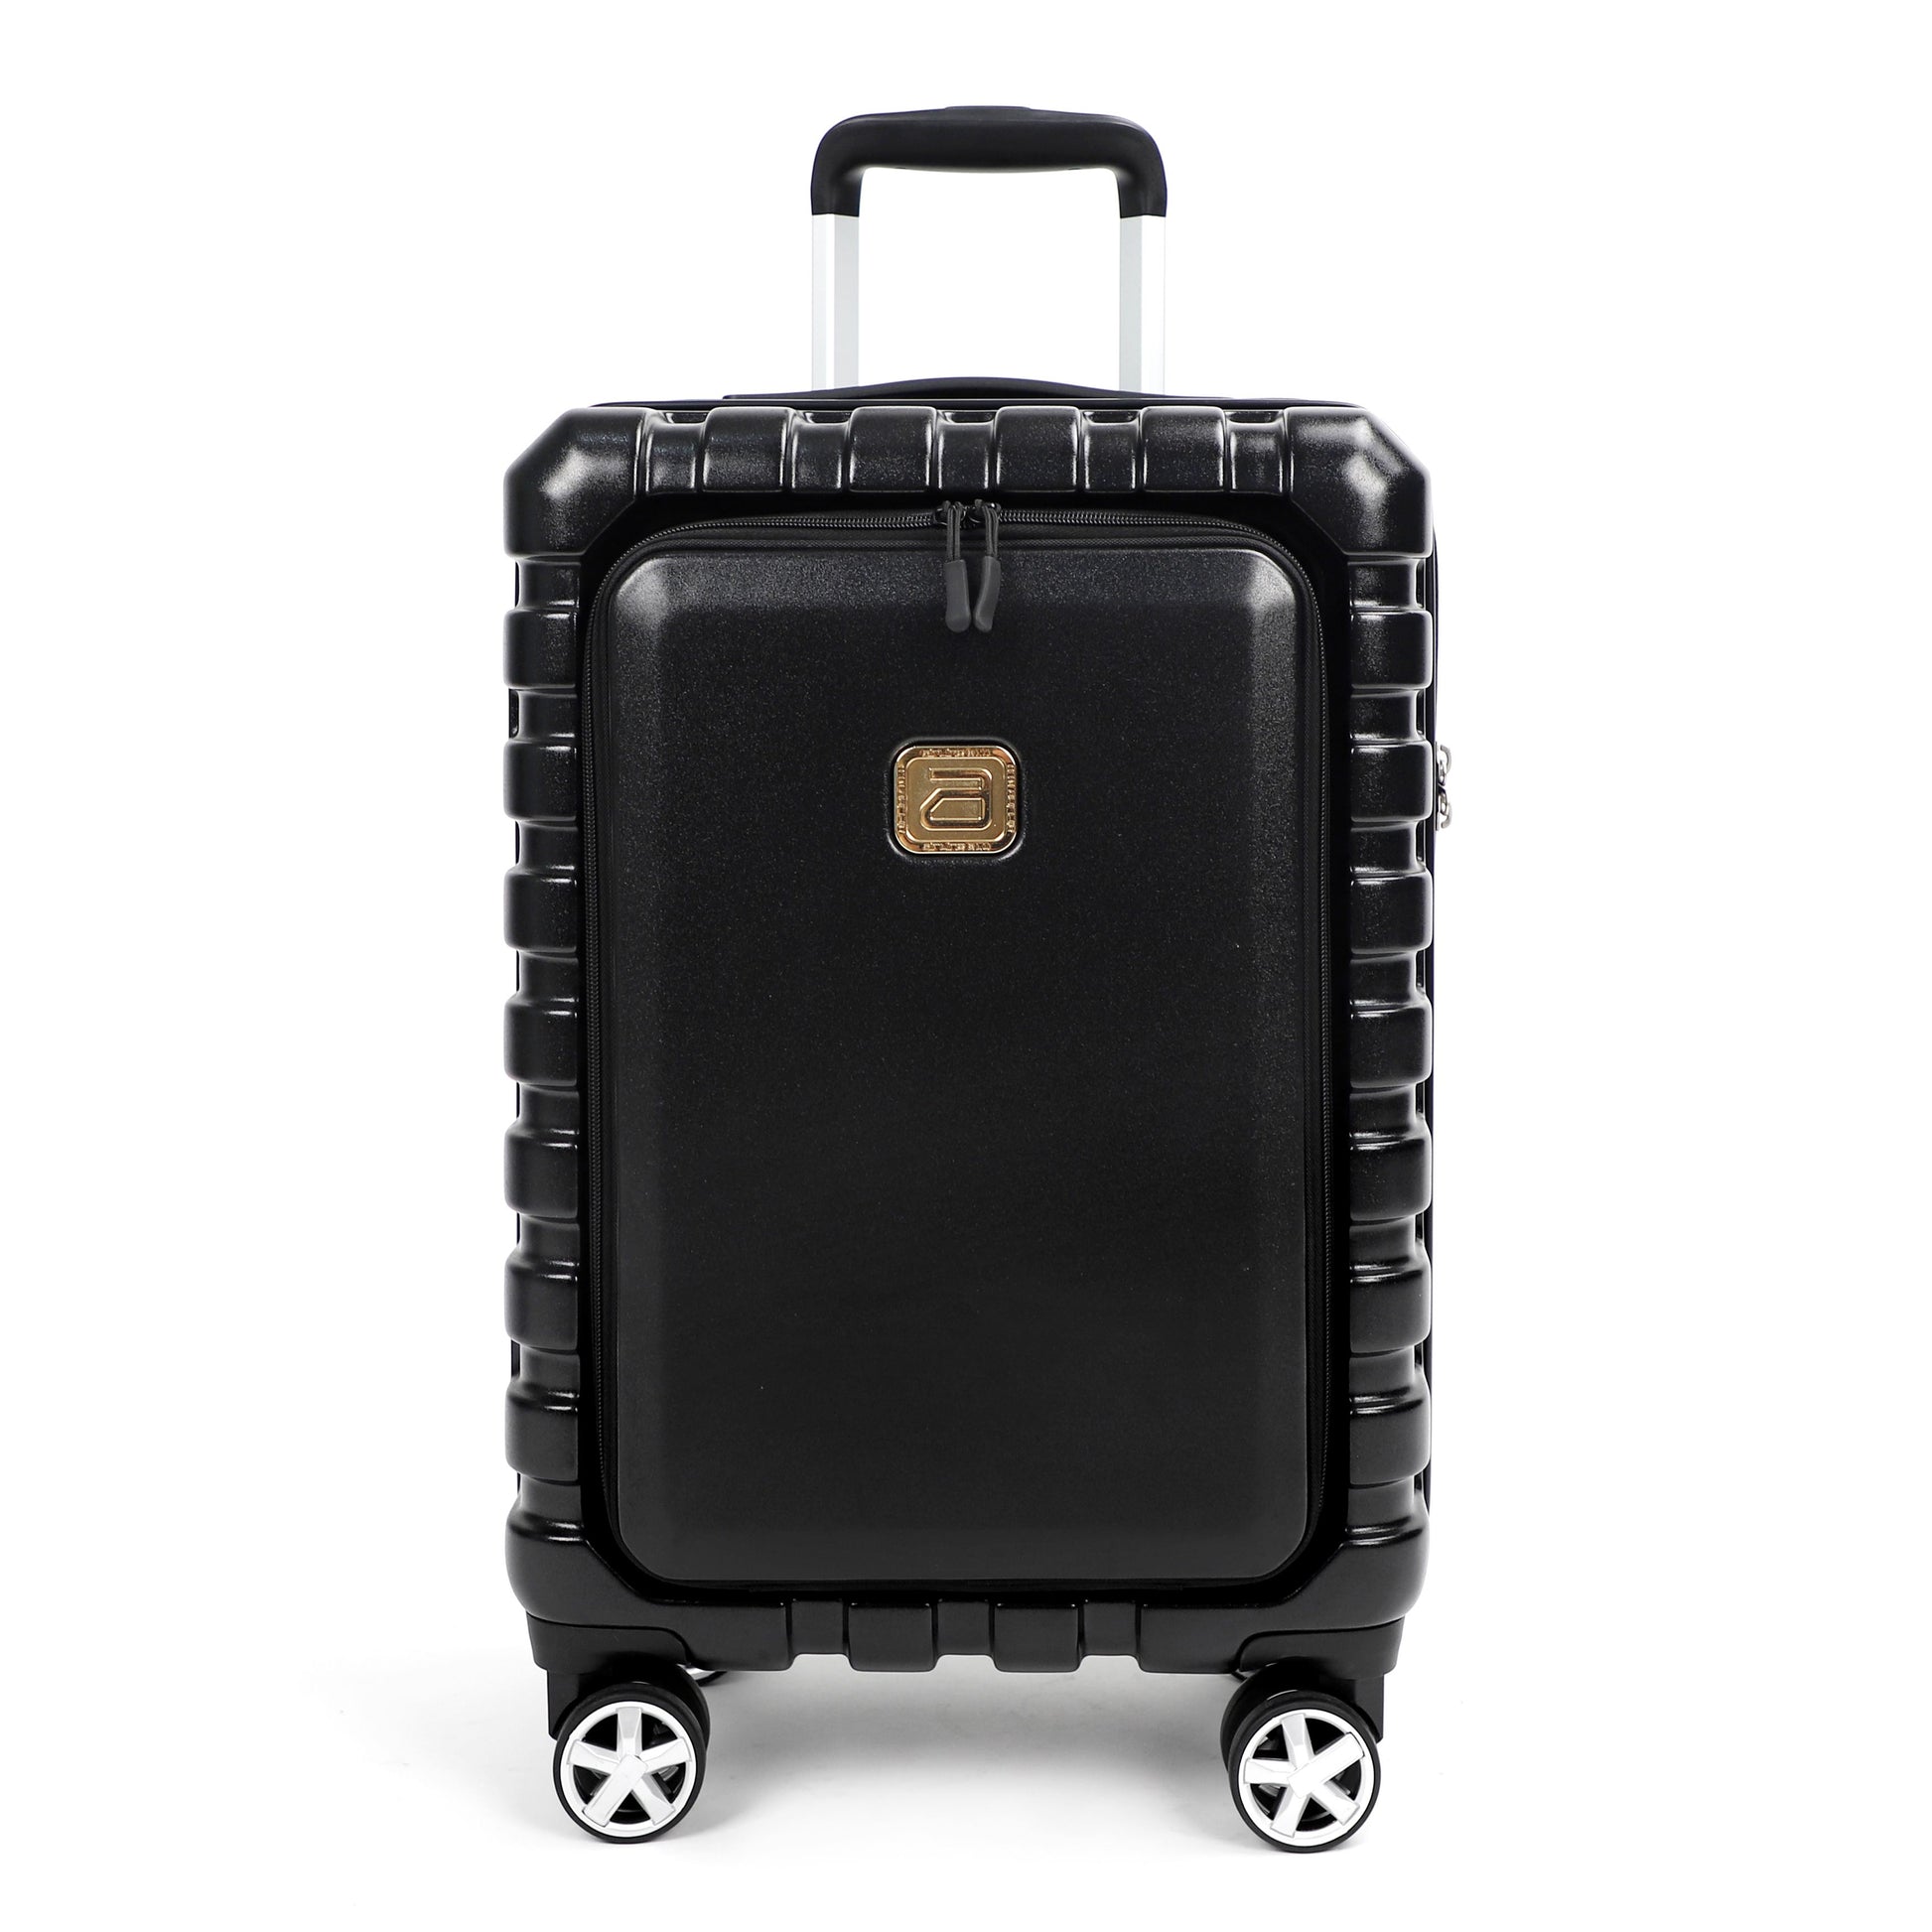 Airline_Carry_On_Luggage_Black_front_viewT1978155001